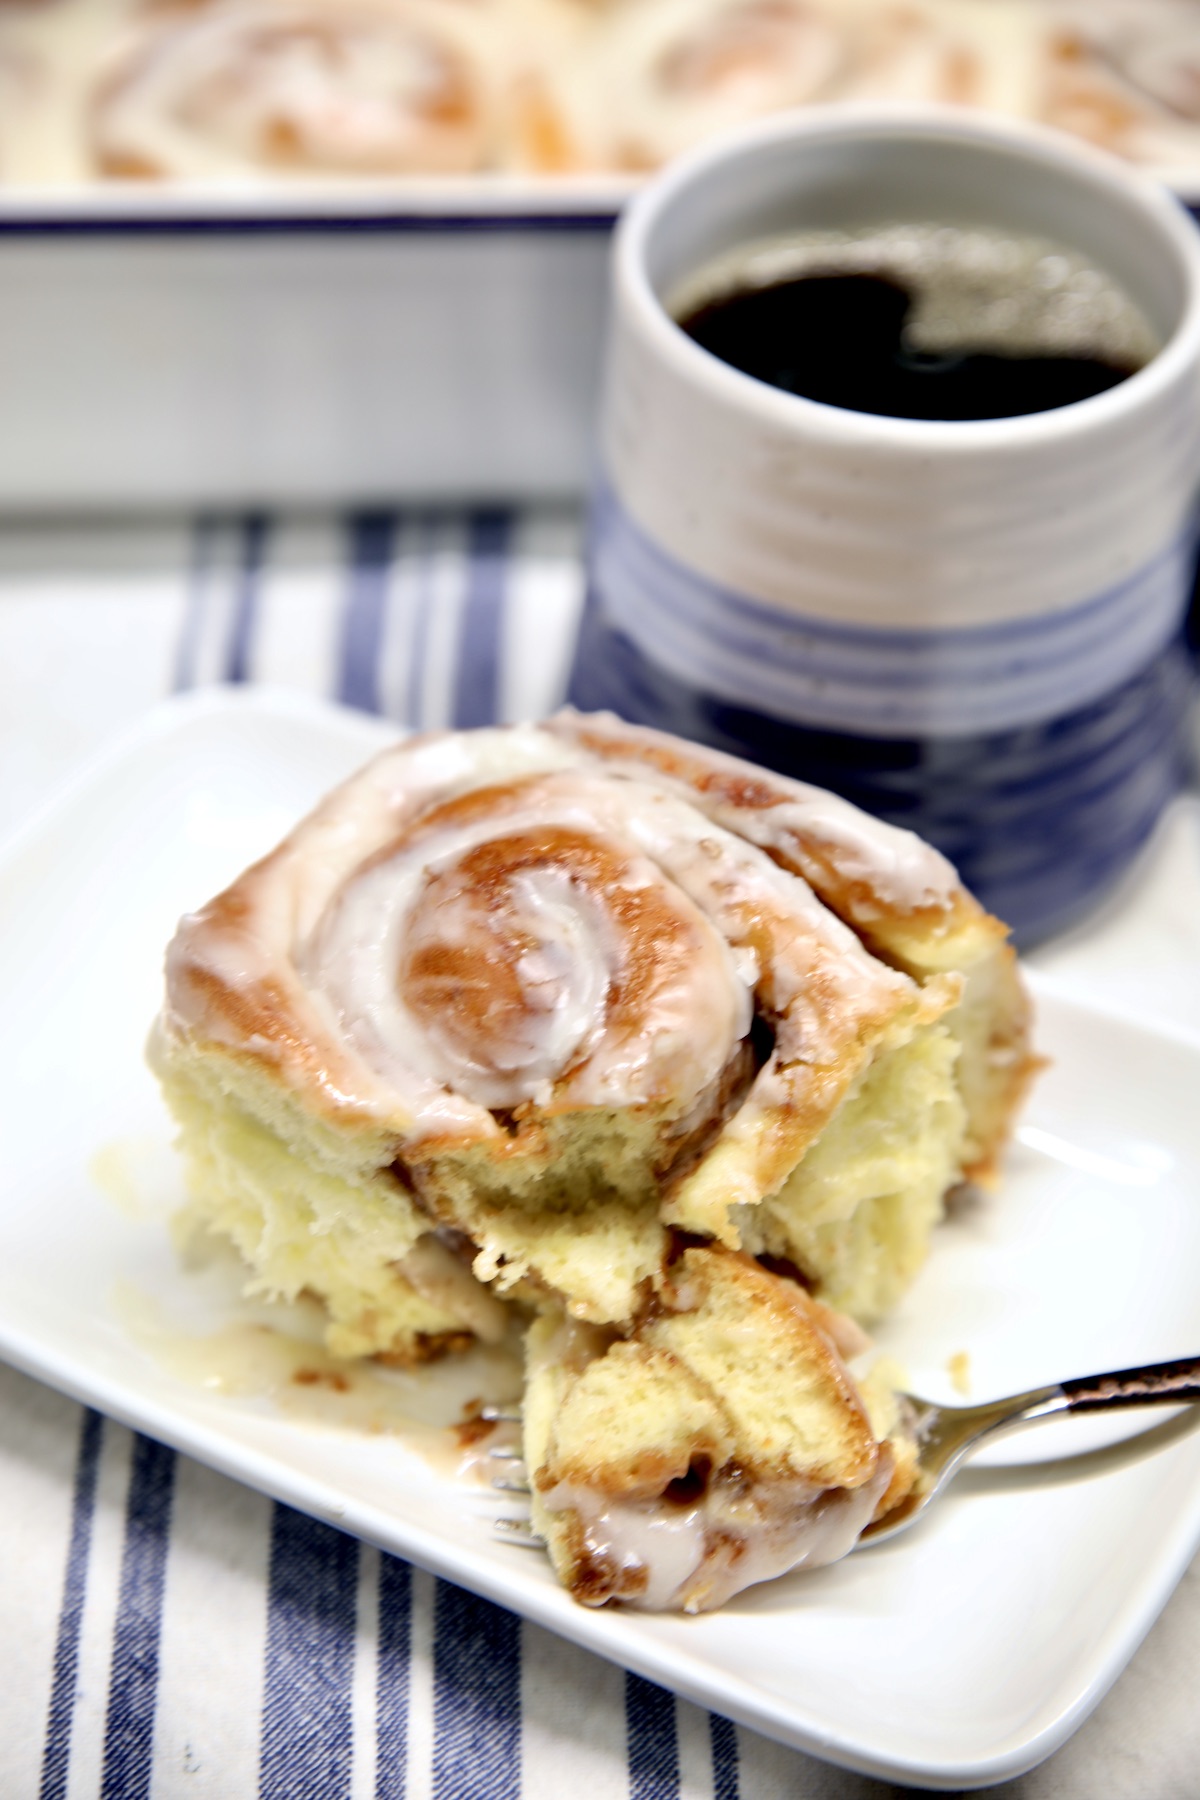 Cinnamon roll on a plate with bite on a fork, cup of coffee.